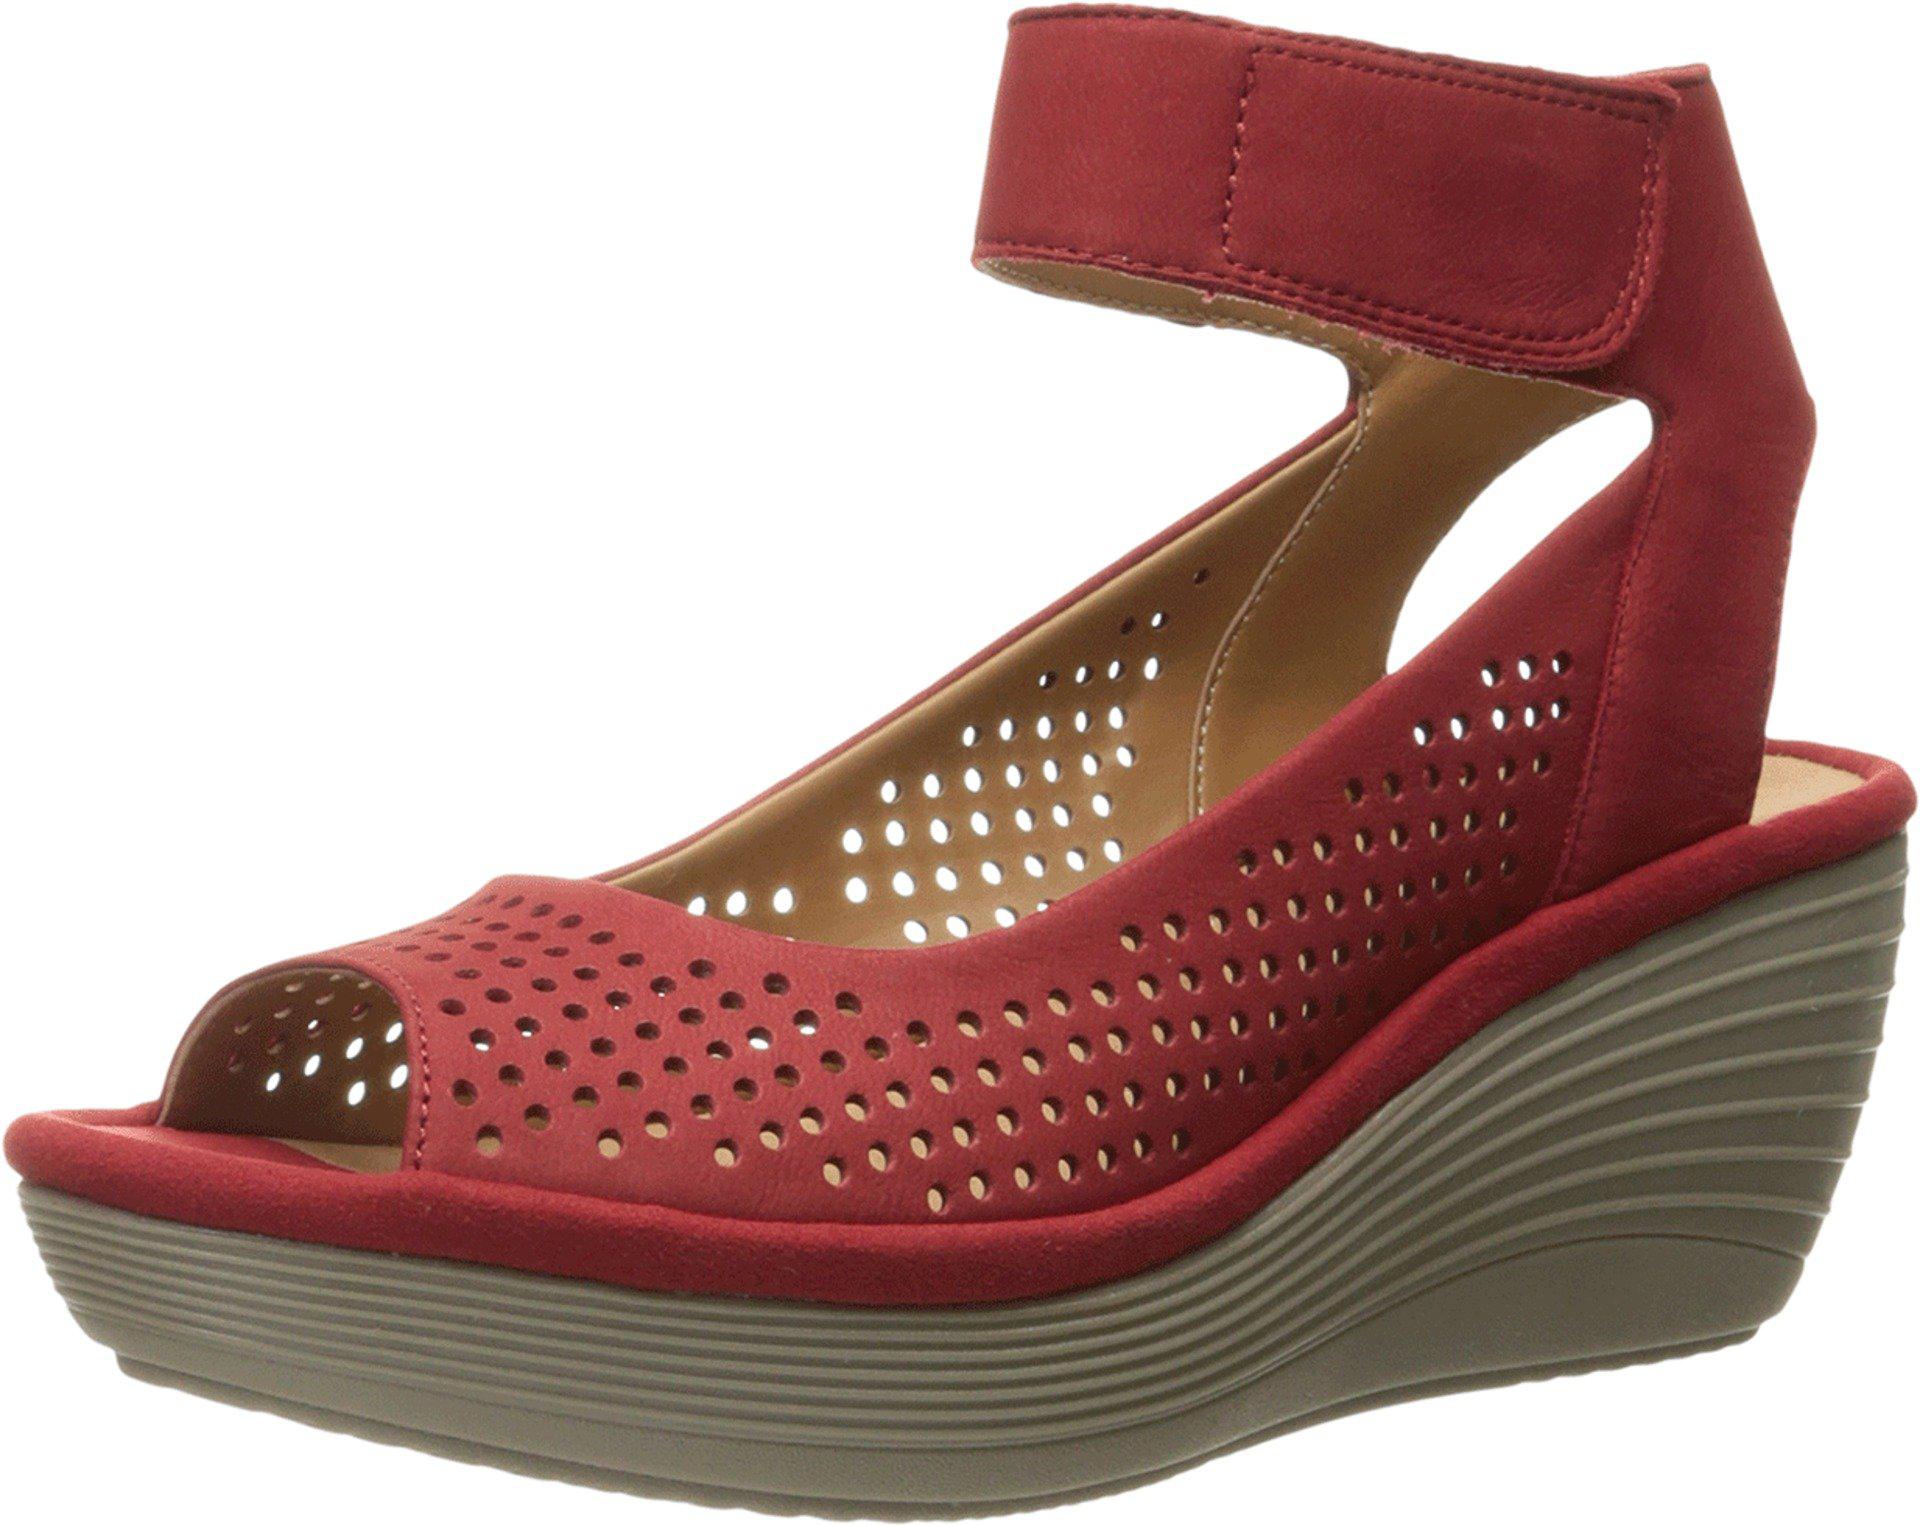 Clarks Leather Reedly Salene Wedge Sandal in Red Nubuck (Red) | Lyst